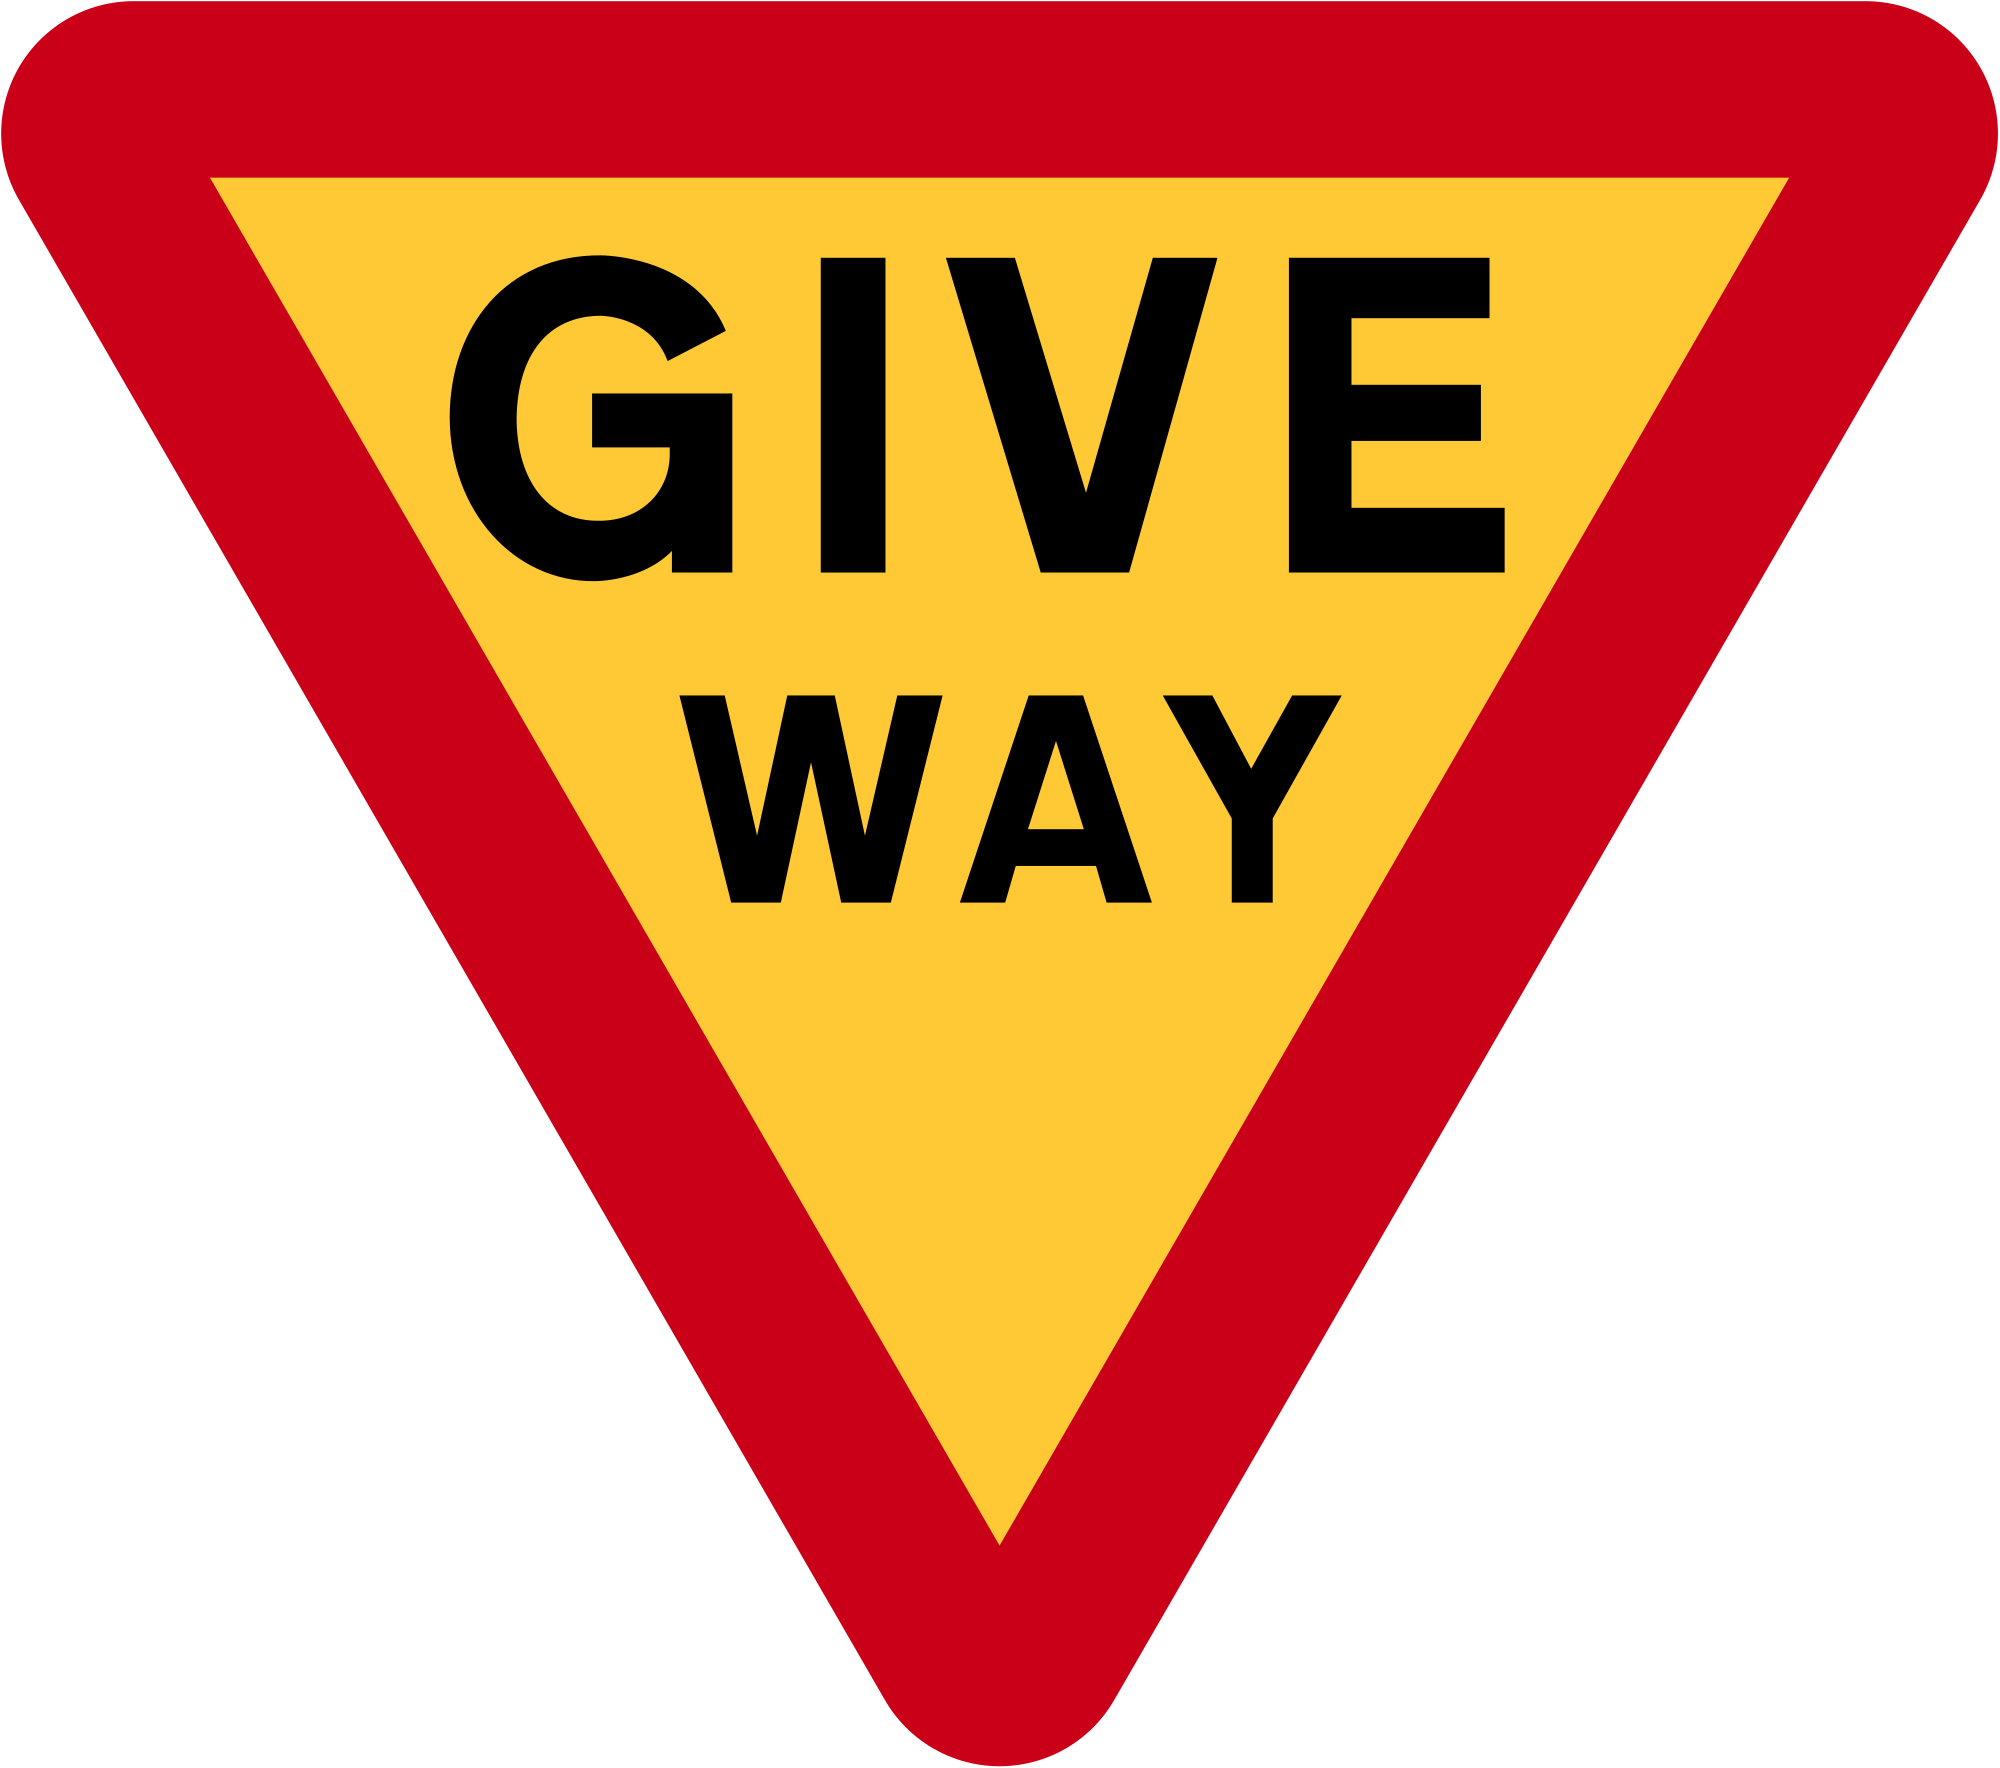 Open - Give Way Sign Uk (2000x1768)